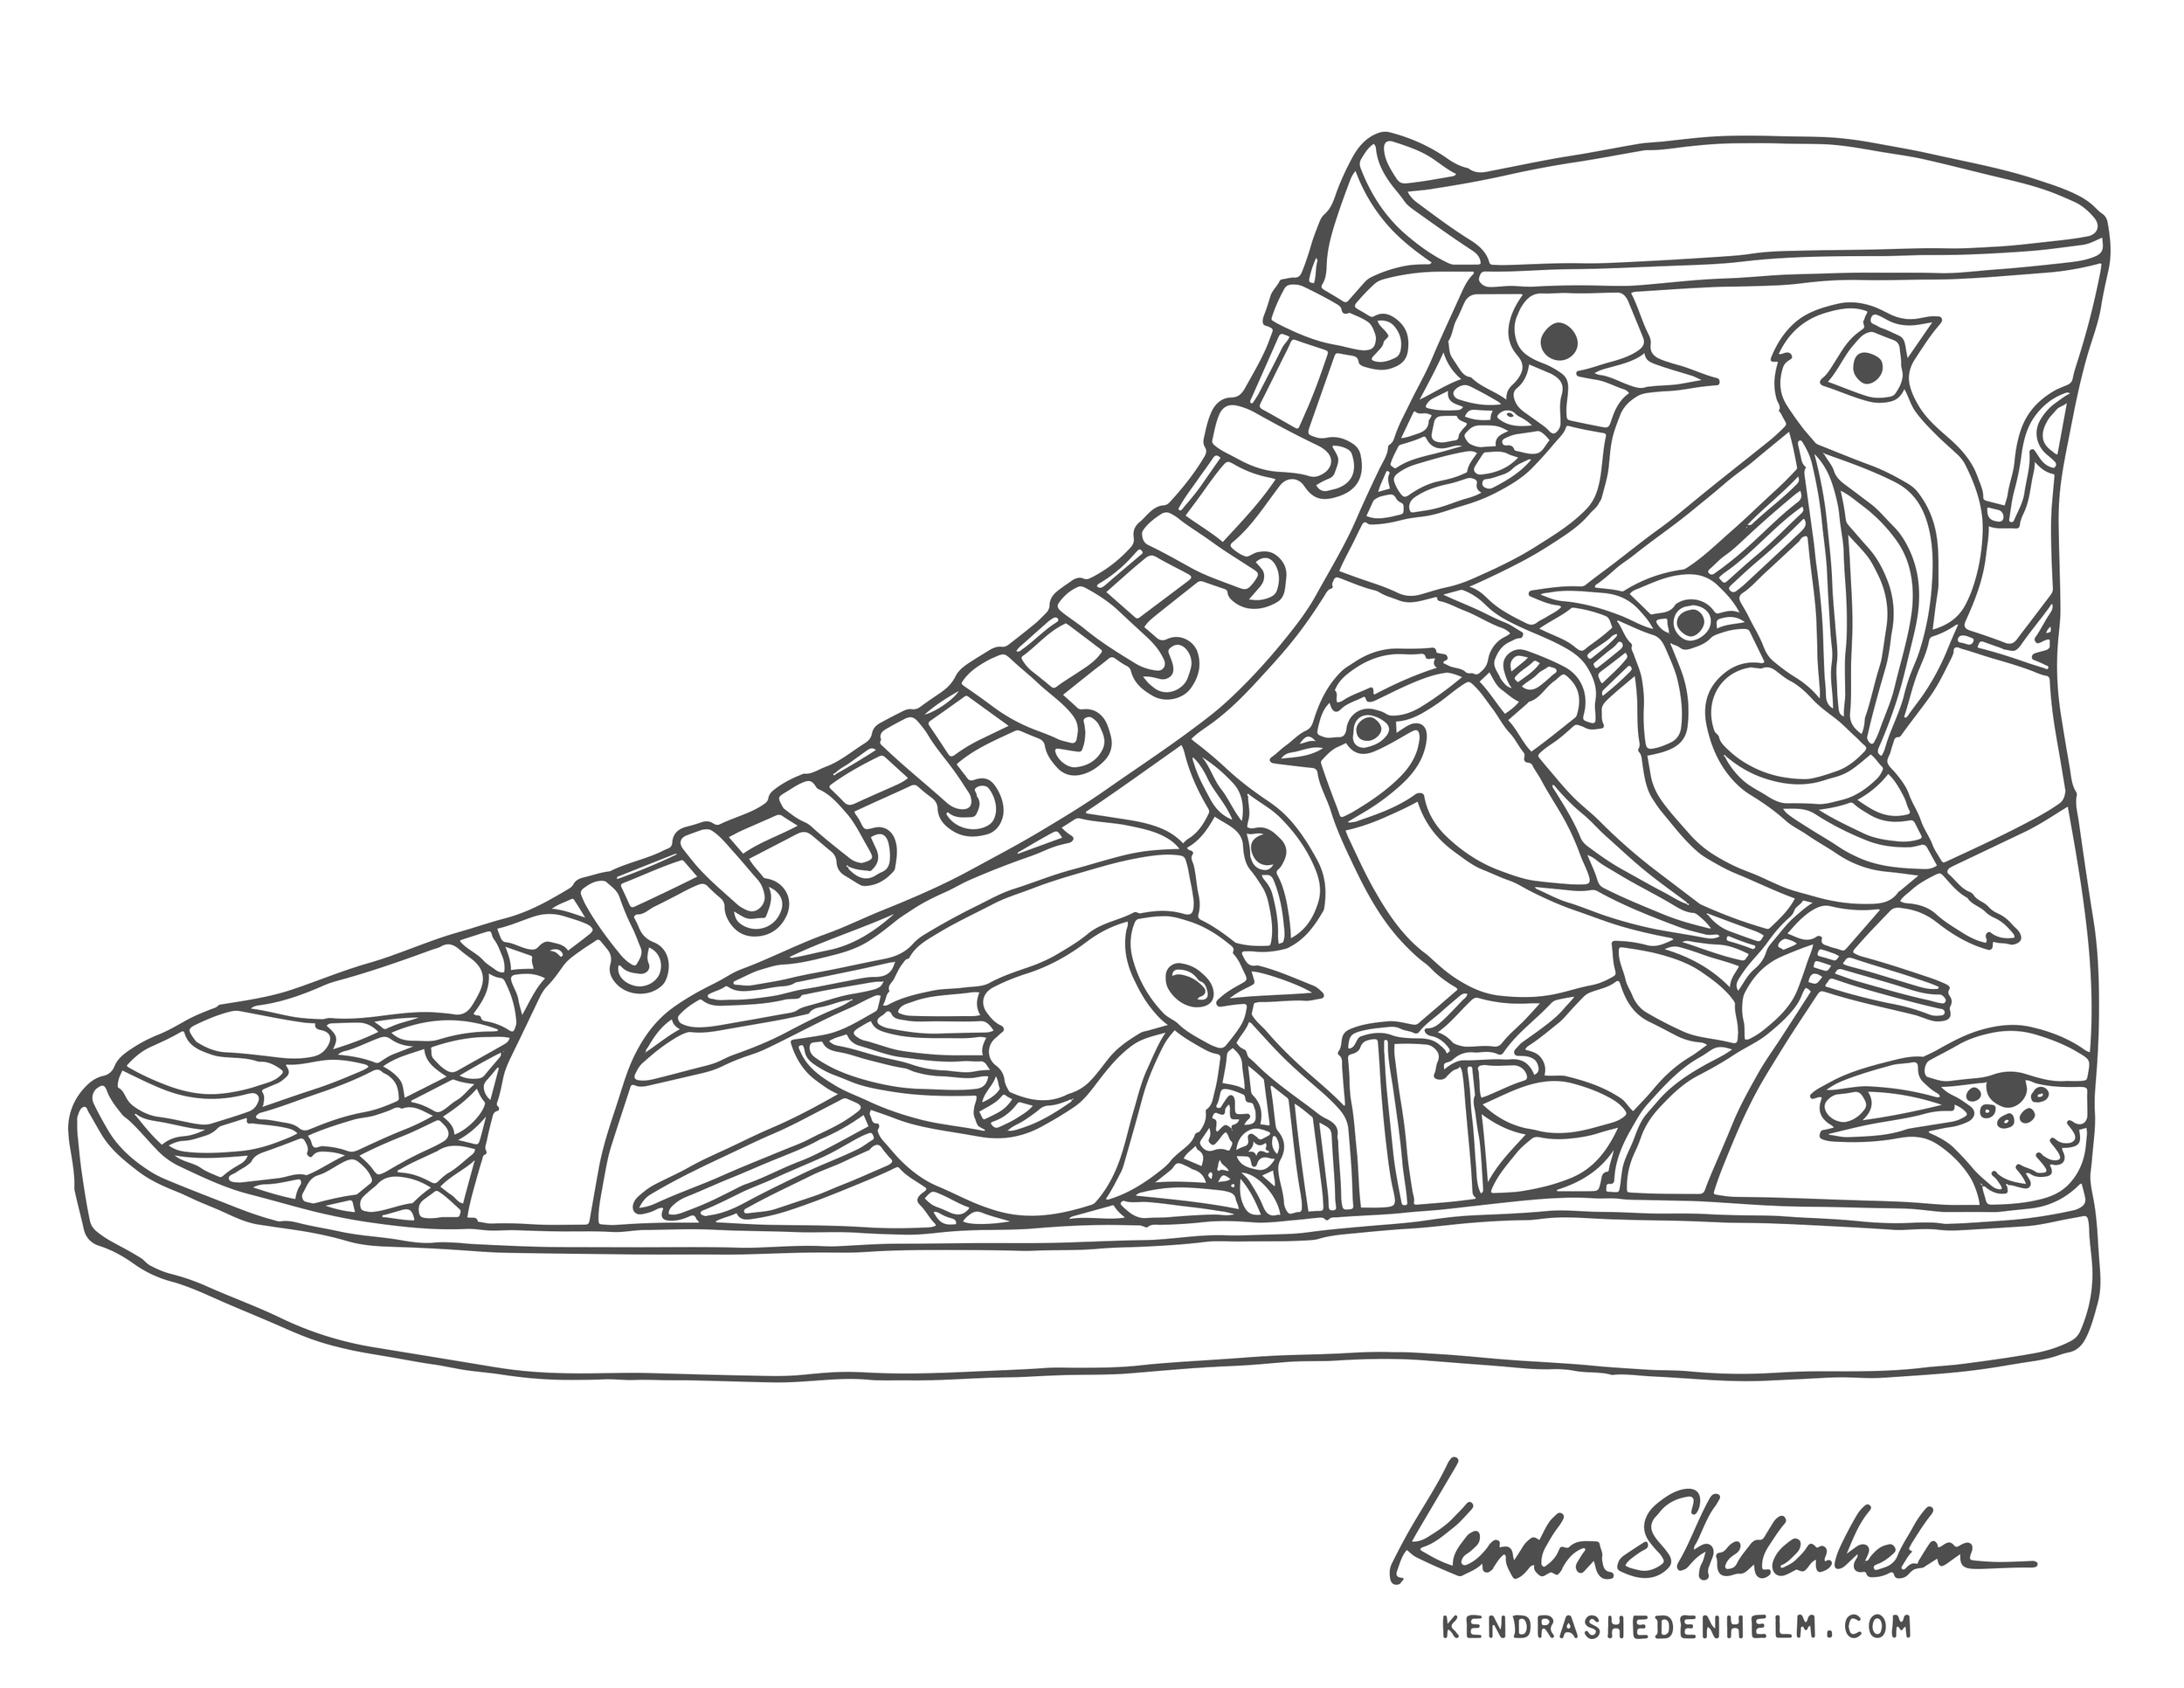 Kendra_Shedenhelm_Coloring-Pages_Shoe_JustBirds.jpg